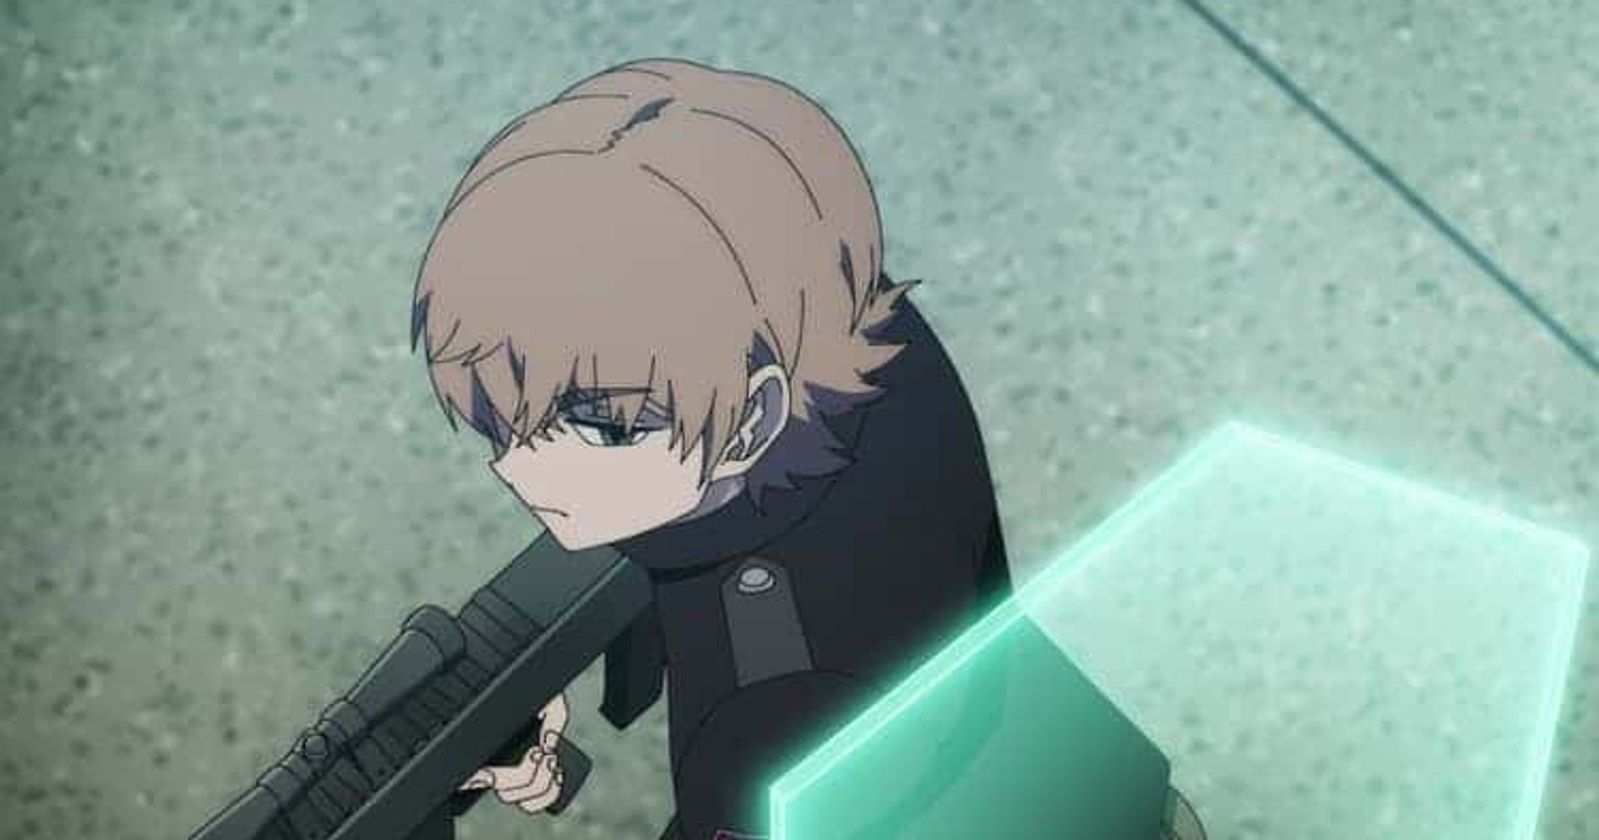 World Trigger: Season 4 - Everything You Should Know - Cultured